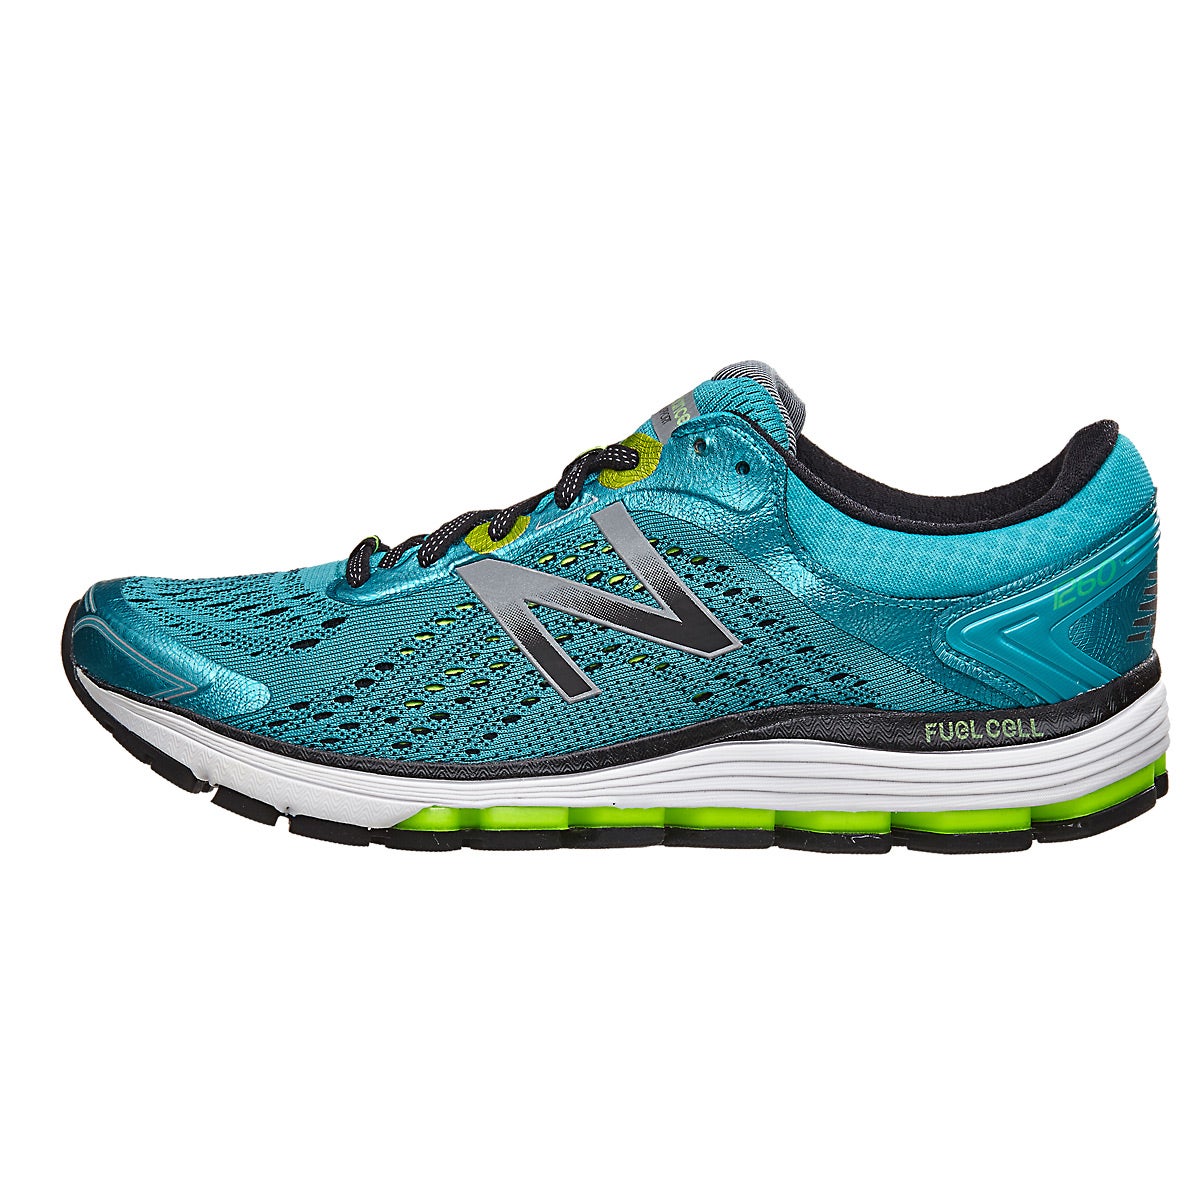 New Balance 1260 v7 Women's Shoes Pisces Blue/Lime 360° View | Running ...